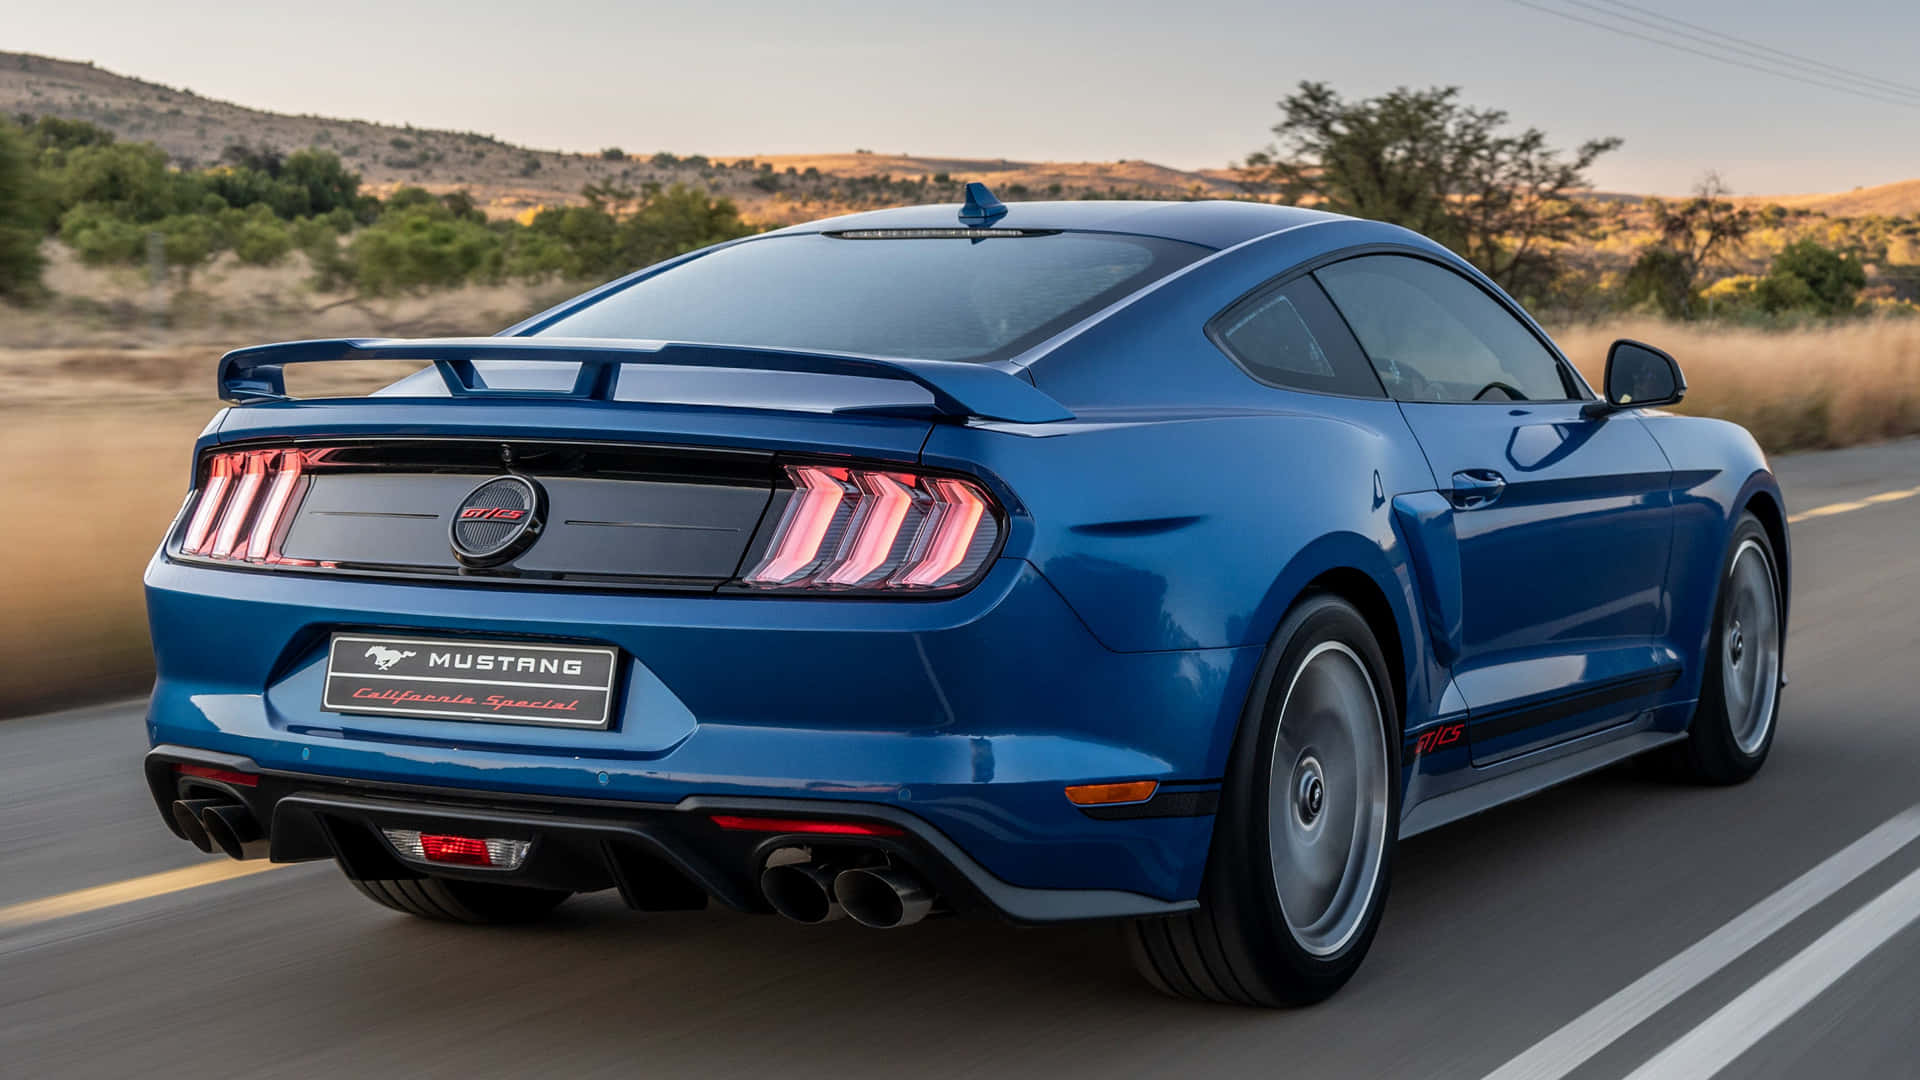 Stunning Ford Mustang California Special on the Road Wallpaper